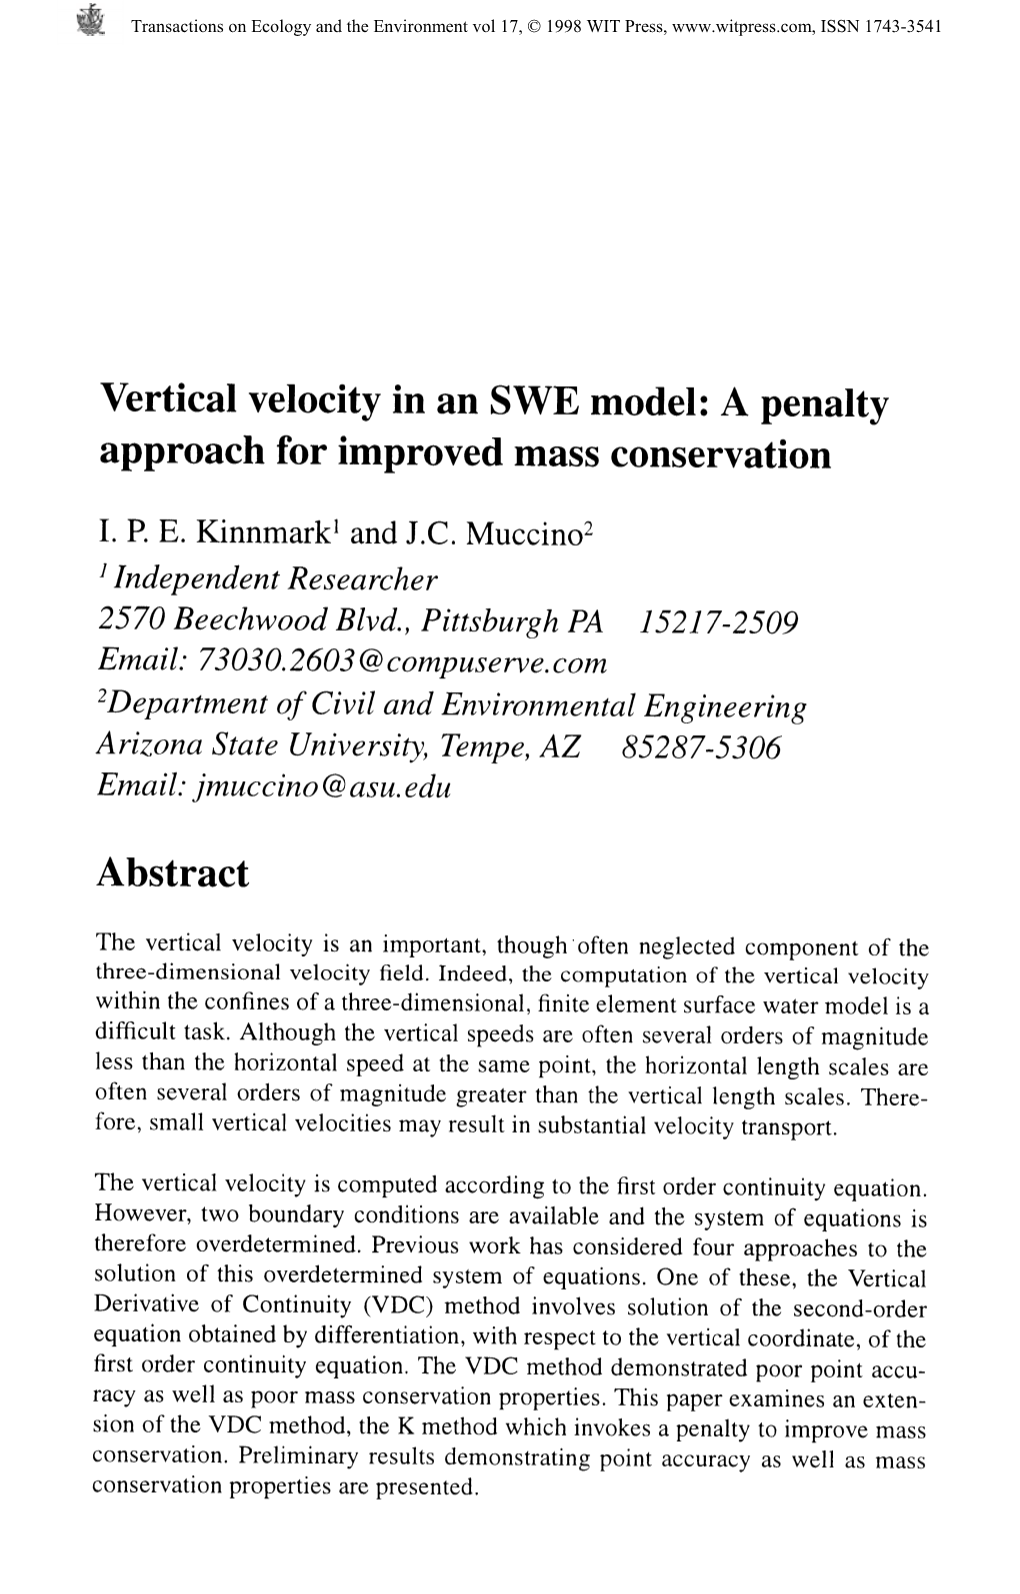 Vertical Velocity in an SWE Model: a Penalty